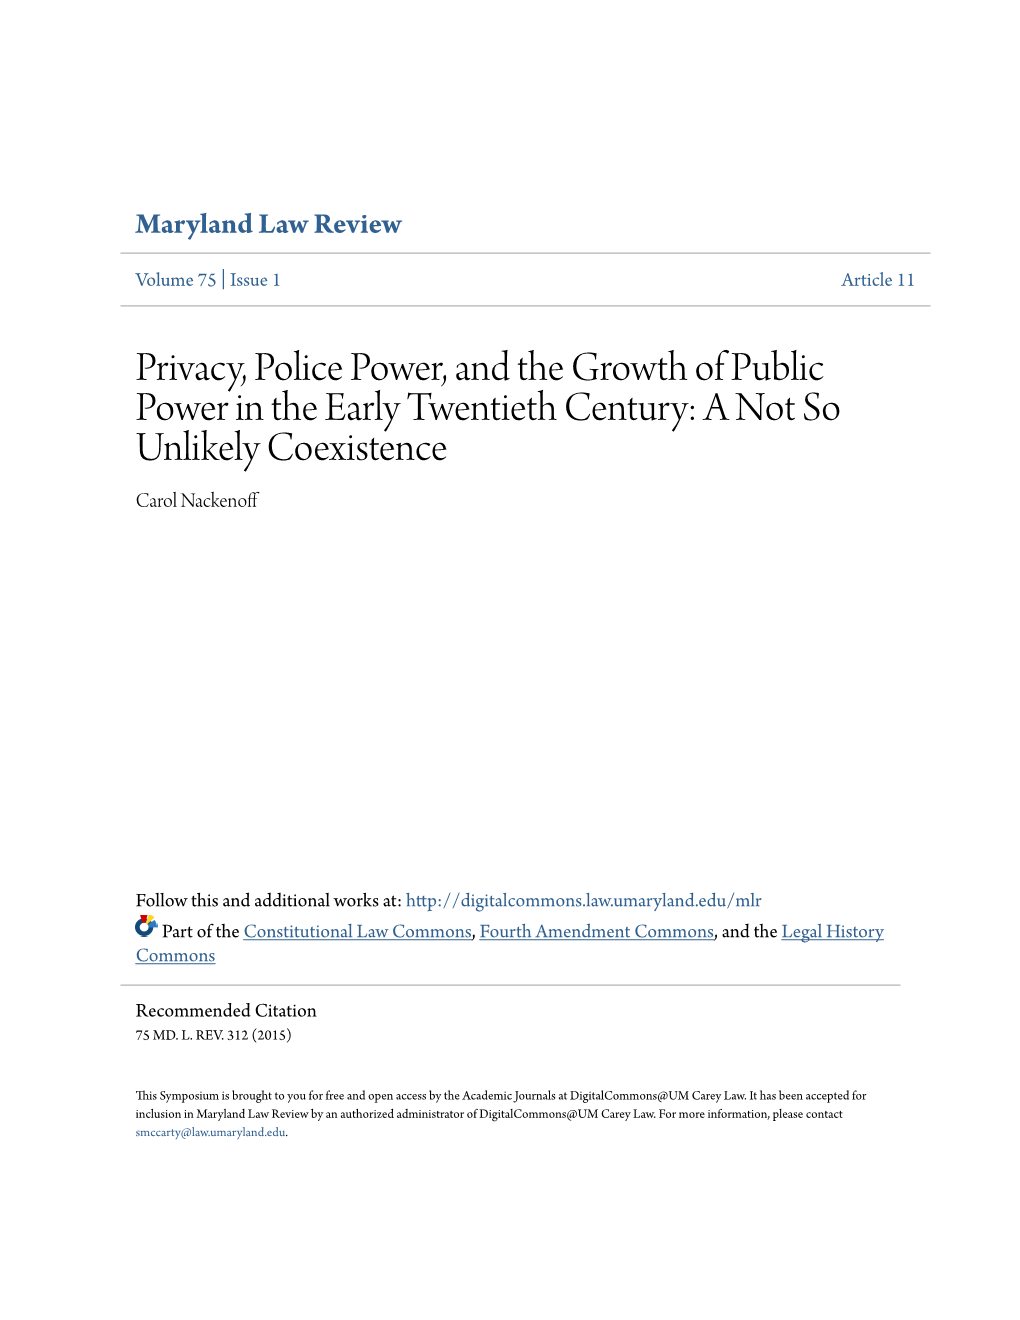 Privacy, Police Power, and the Growth of Public Power in the Early Twentieth Century: a Not So Unlikely Coexistence Carol Nackenoff